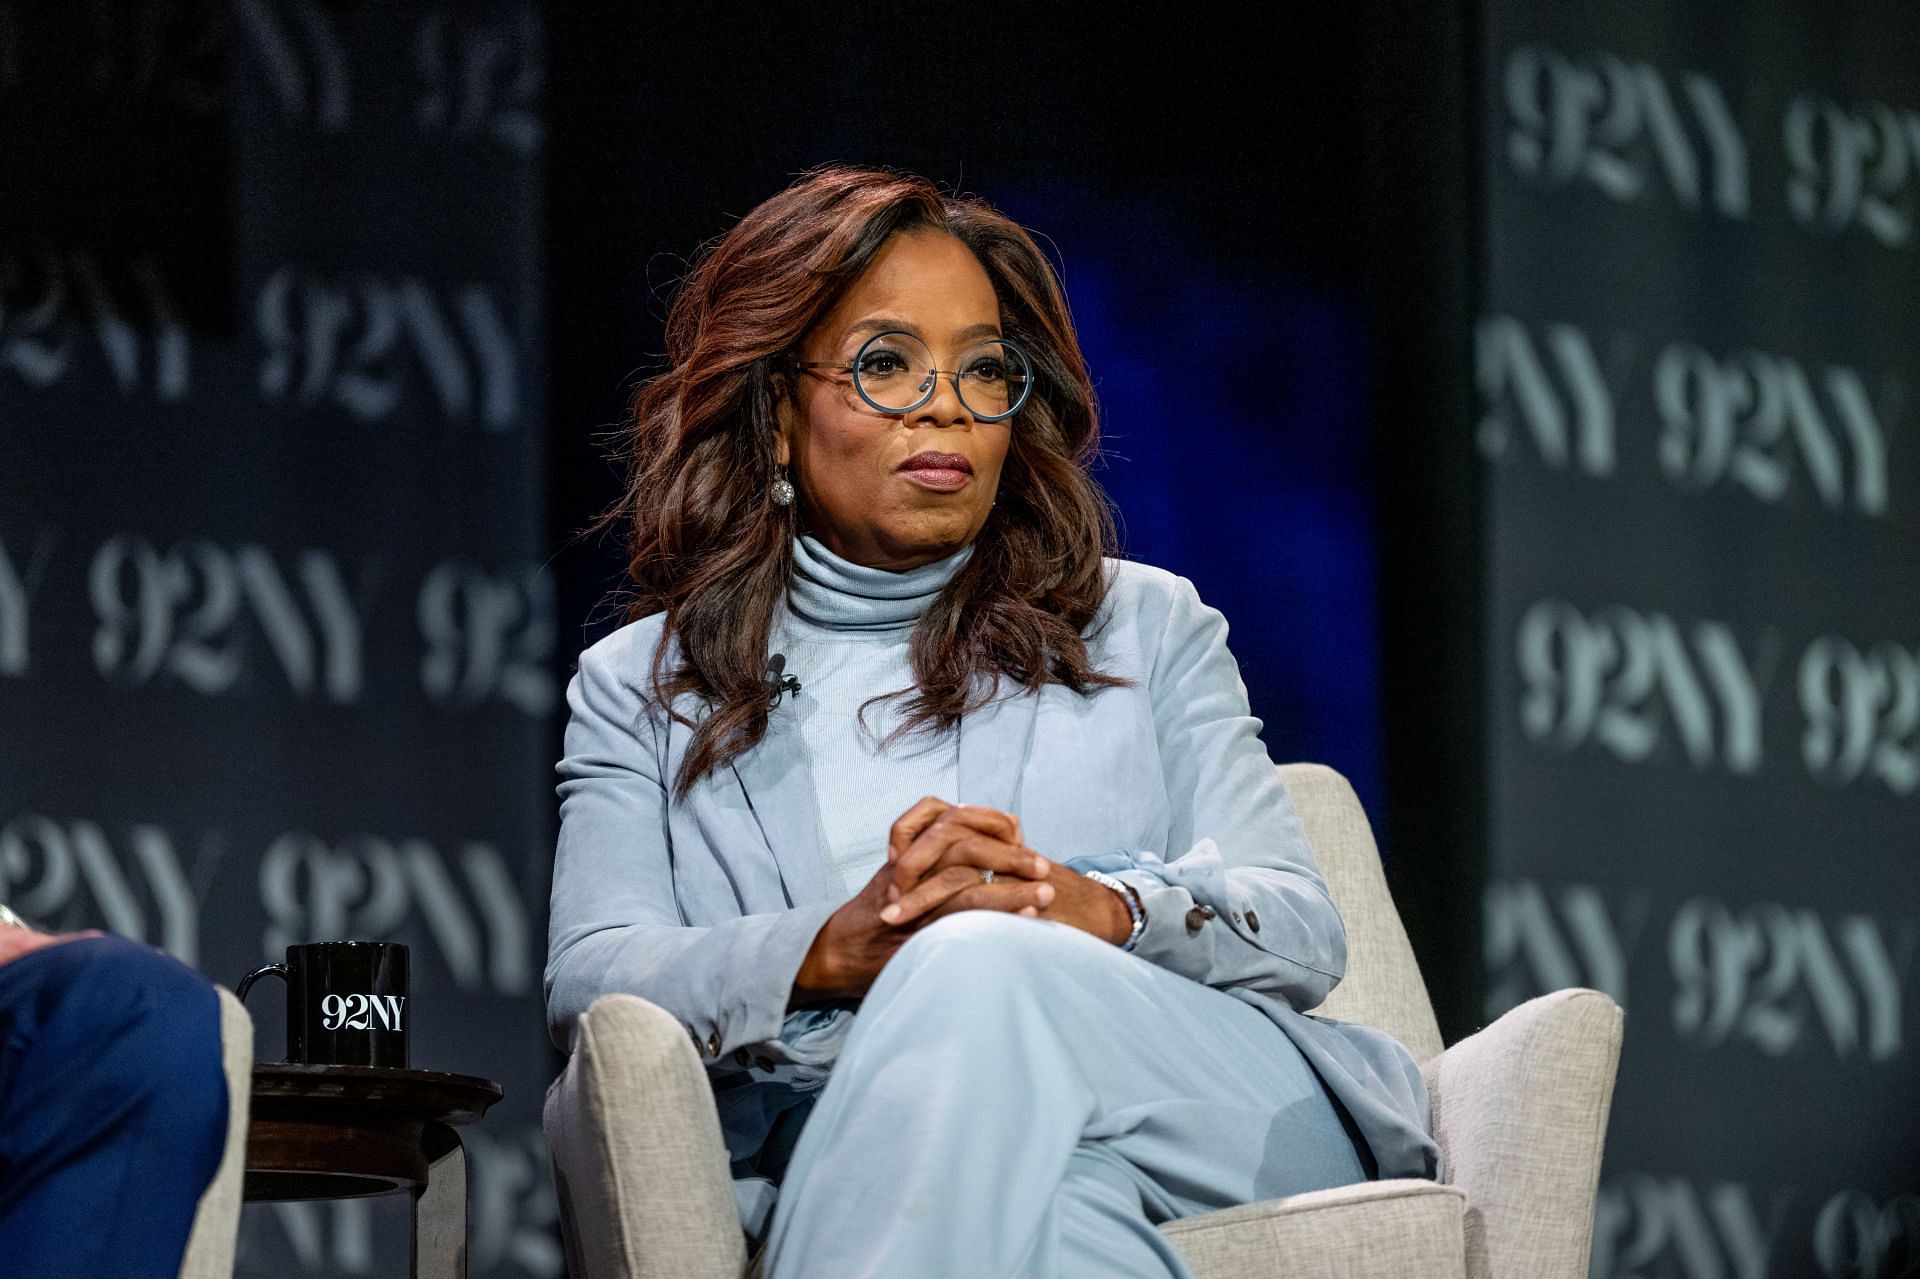 Oprah Winfrey And Arthur C. Brooks In Conversation With George Stephanopoulos: Build The Life You Want